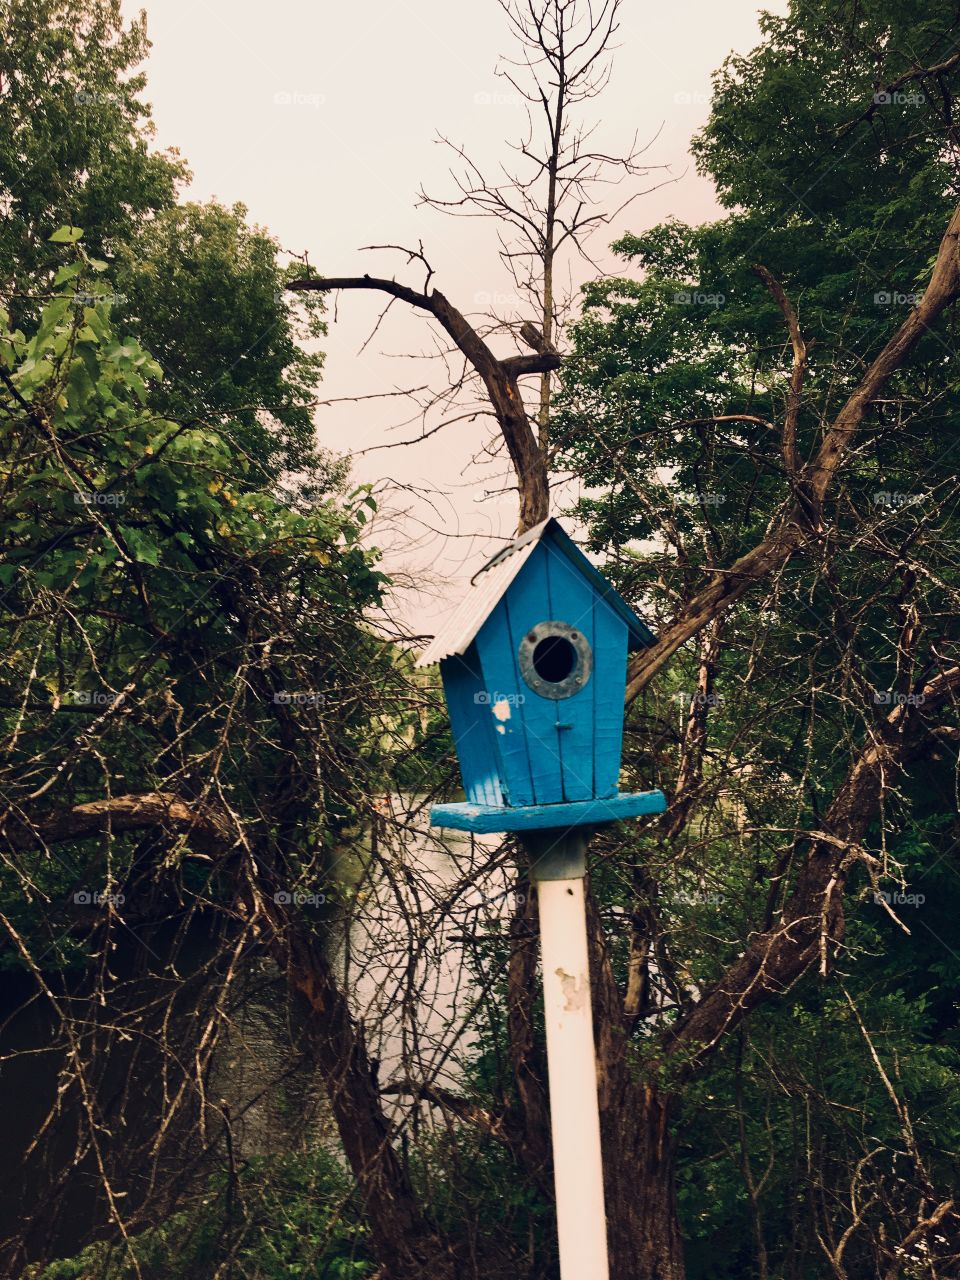 An old bird house I found near an abandoned home.  In Northern Lower Michigan.